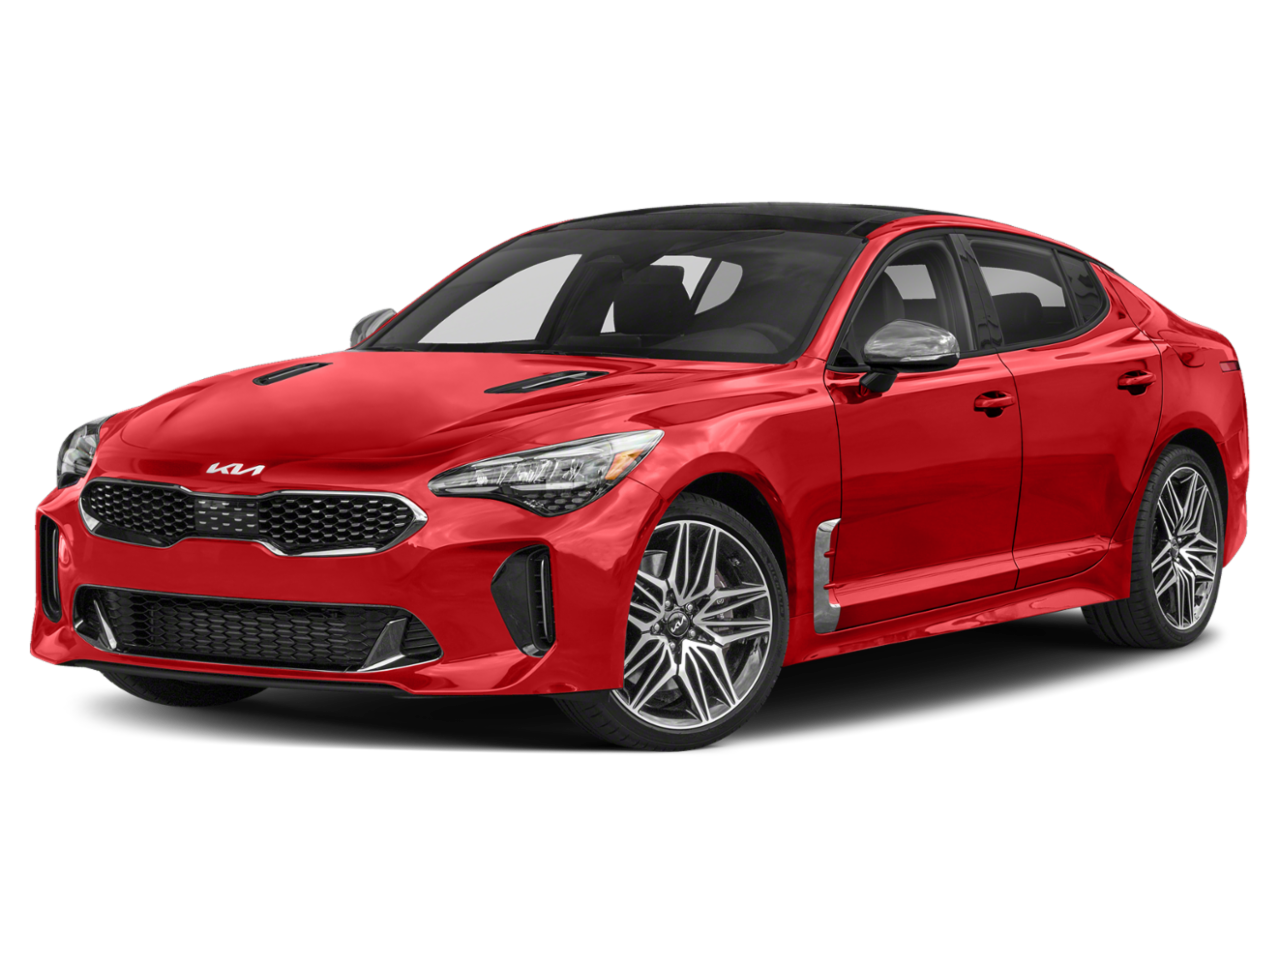 New Kia Stinger from your McHenry IL dealership, Gary Lang Kia.